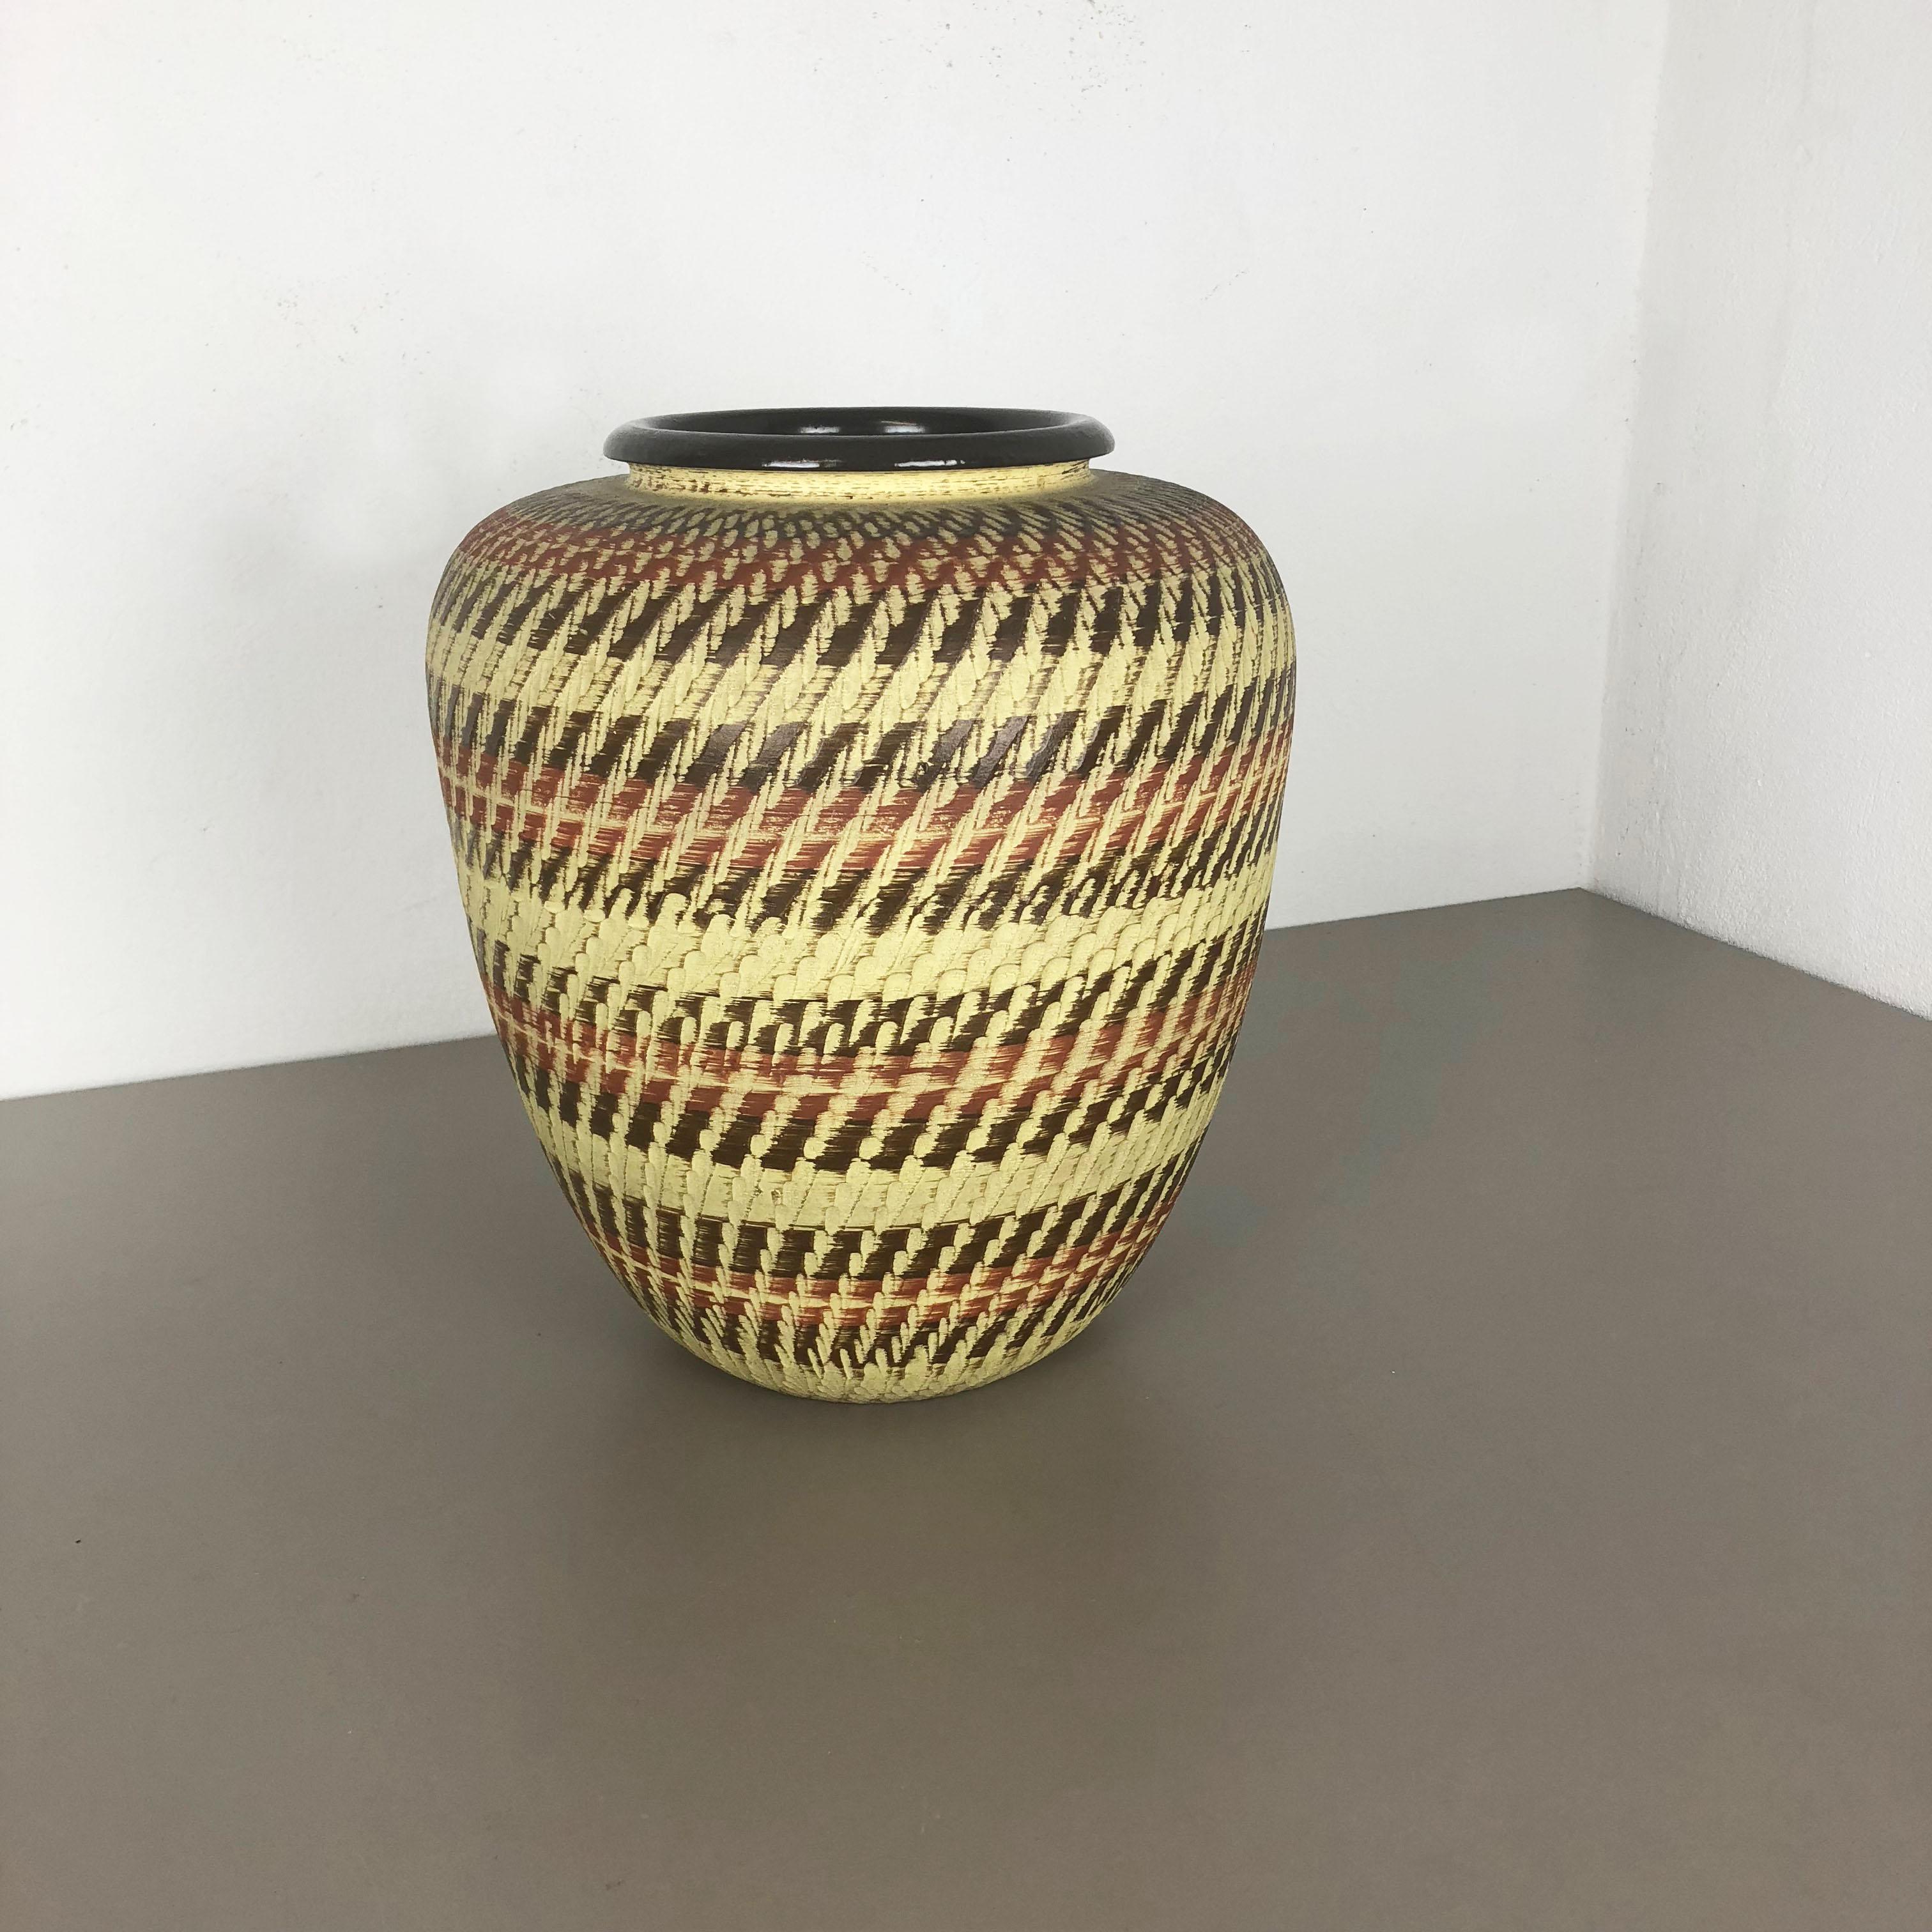 Article:

Pottery ceramic vase


Producer:

Dümmler and Breiden, Germany


Decade:

1950s





Original vintage 1950s pottery stoneware ceramic vase in Germany. High quality German production with a nice abstract coloration. The